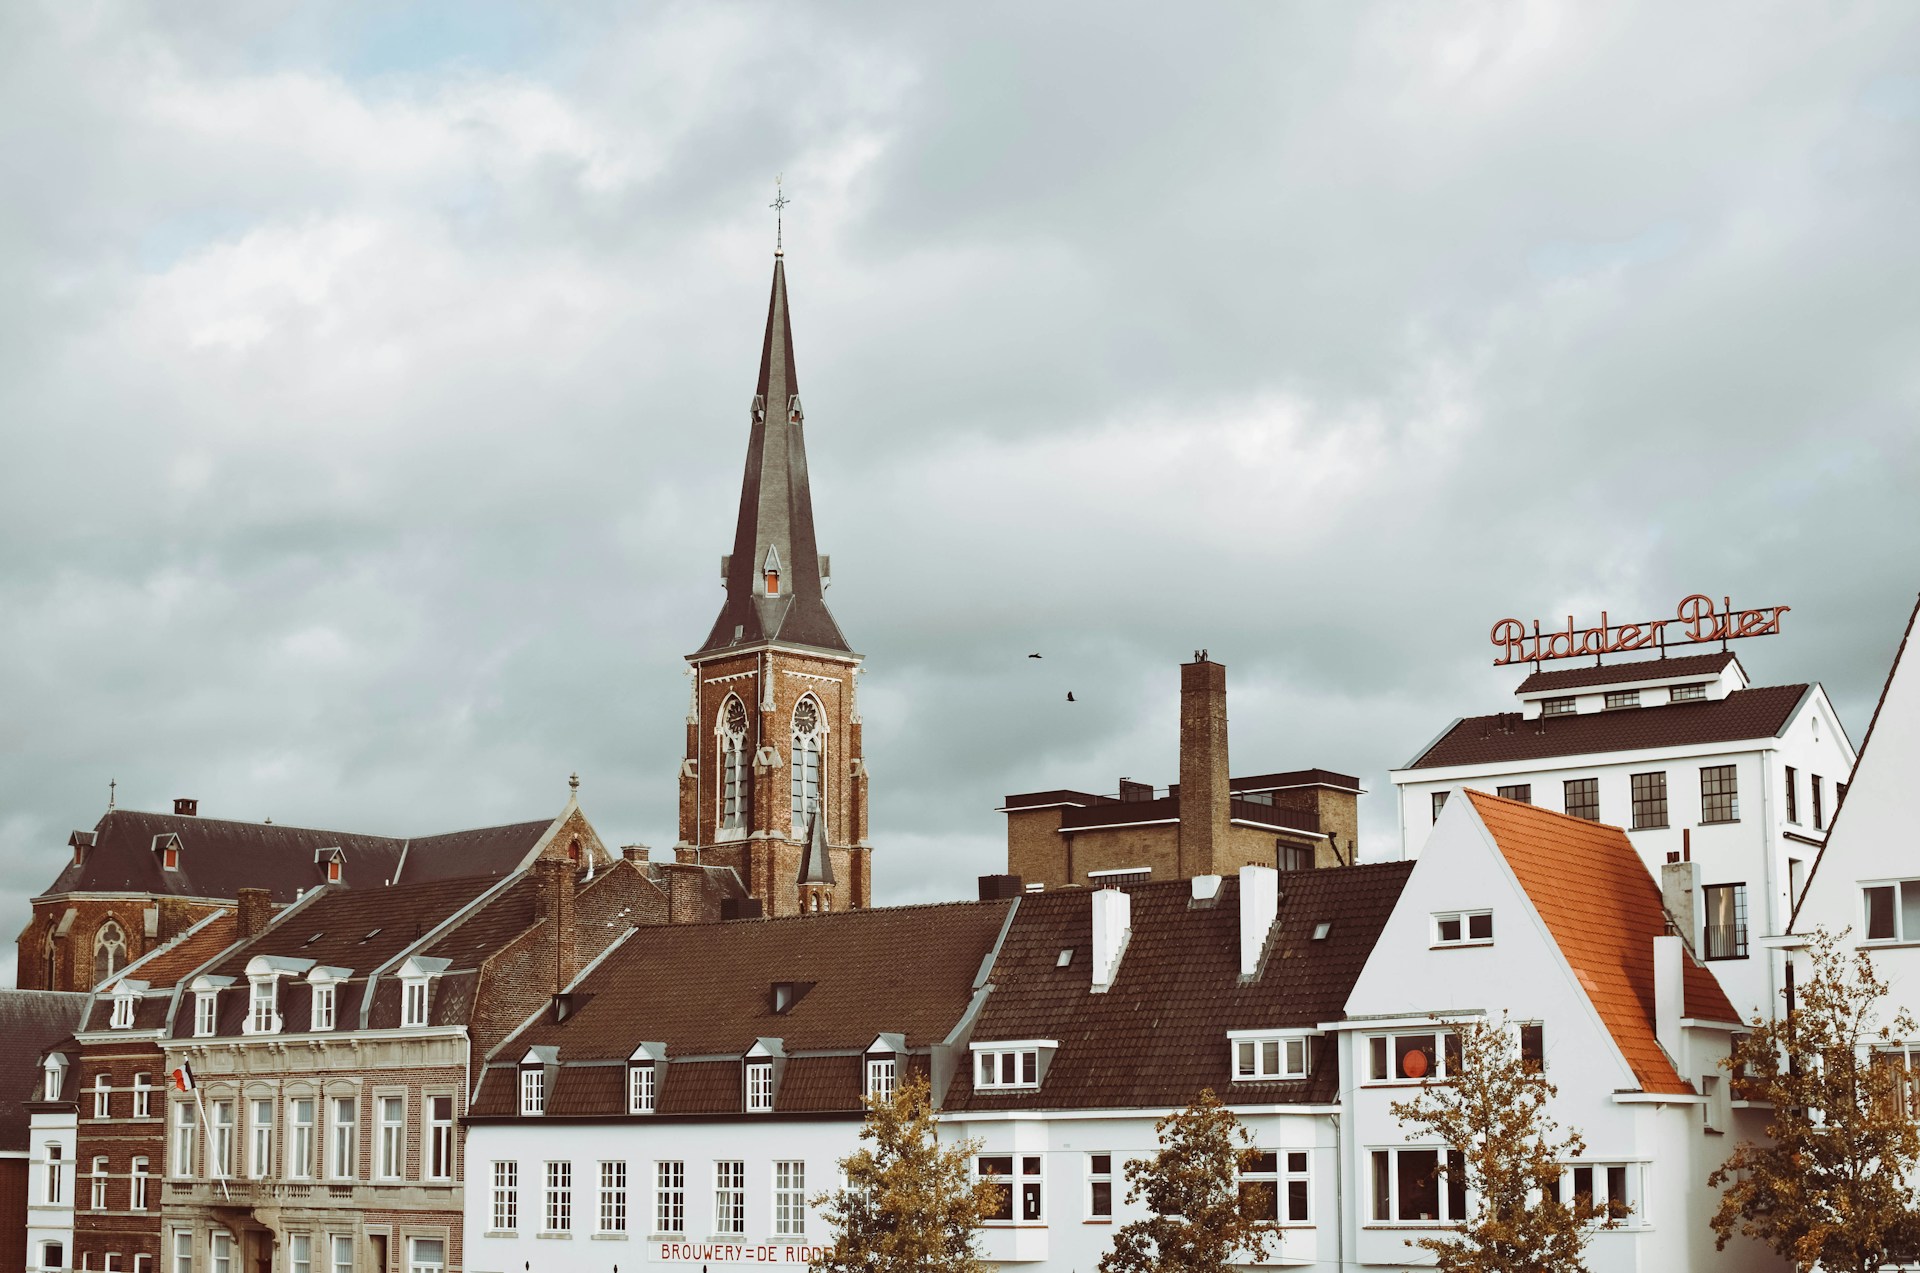 Activities and things to do in Maastricht